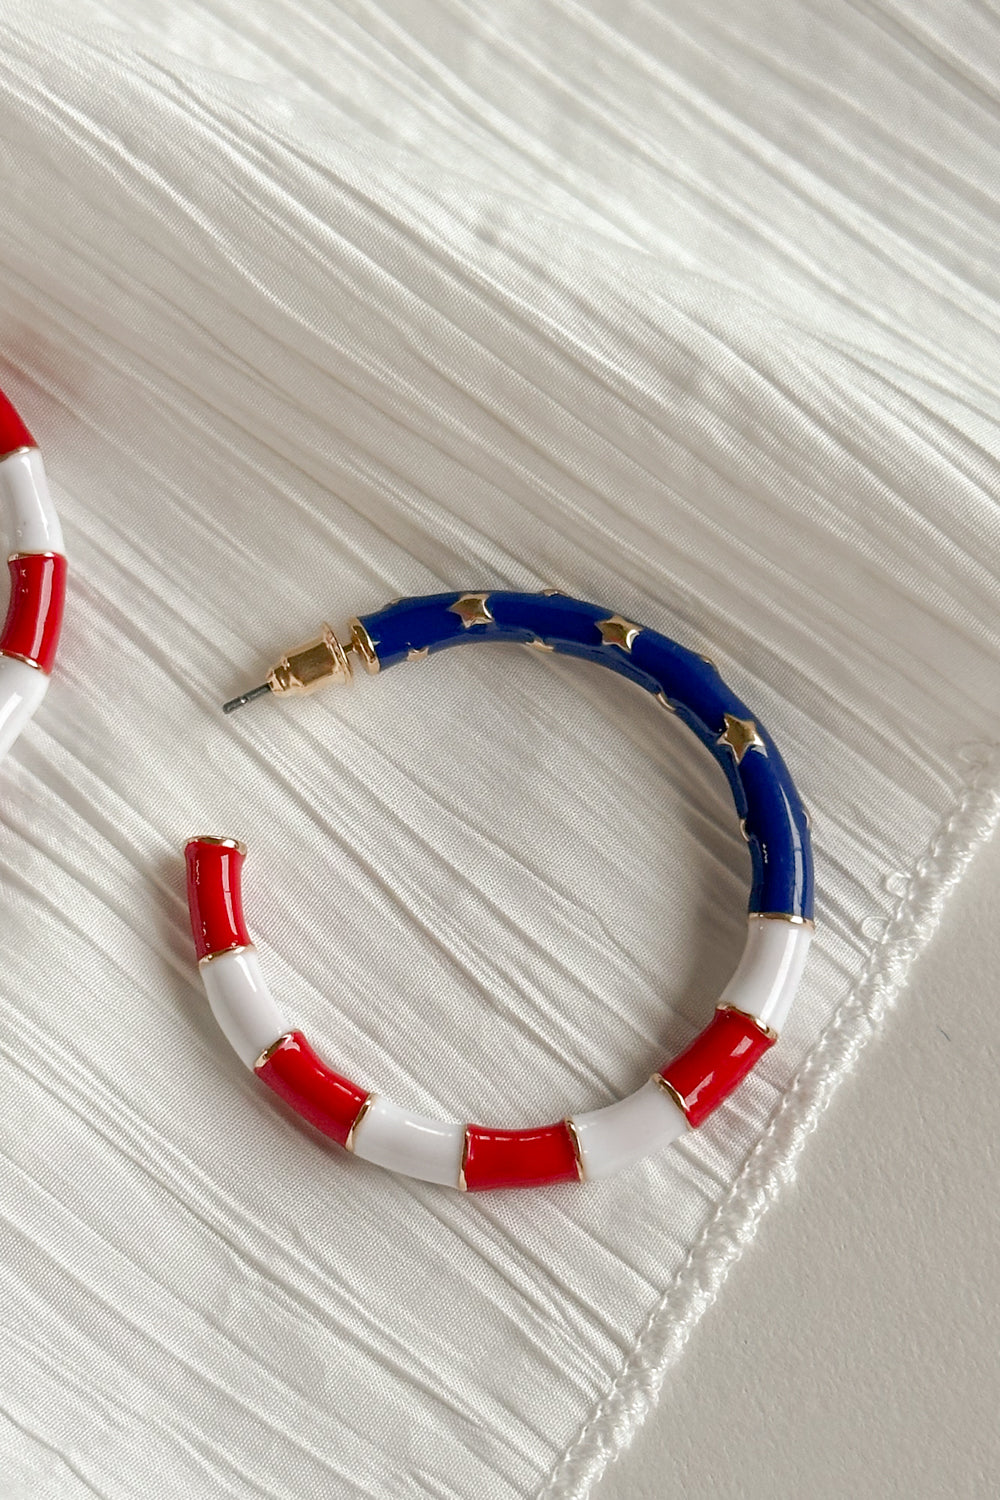 Image shows close-up of Eleanor Red, White, & Blue Hoop Earrings against a white background. Earrings feature red and white striped and a blue section with gold stars.